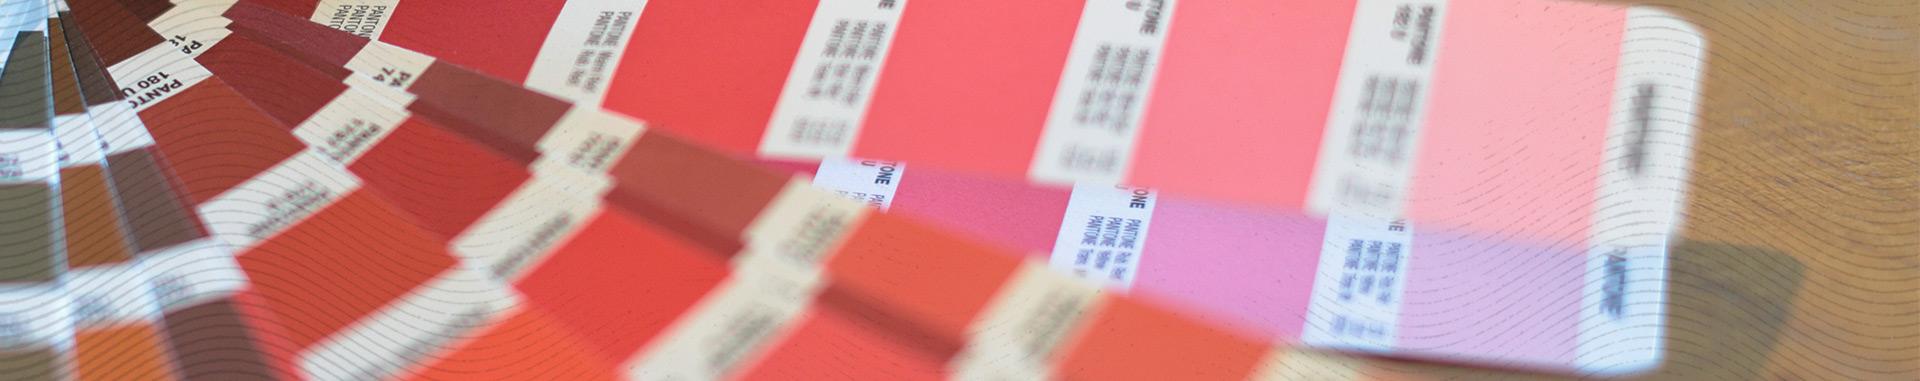 10 Pantone color swatches displayed in a fan arrangement